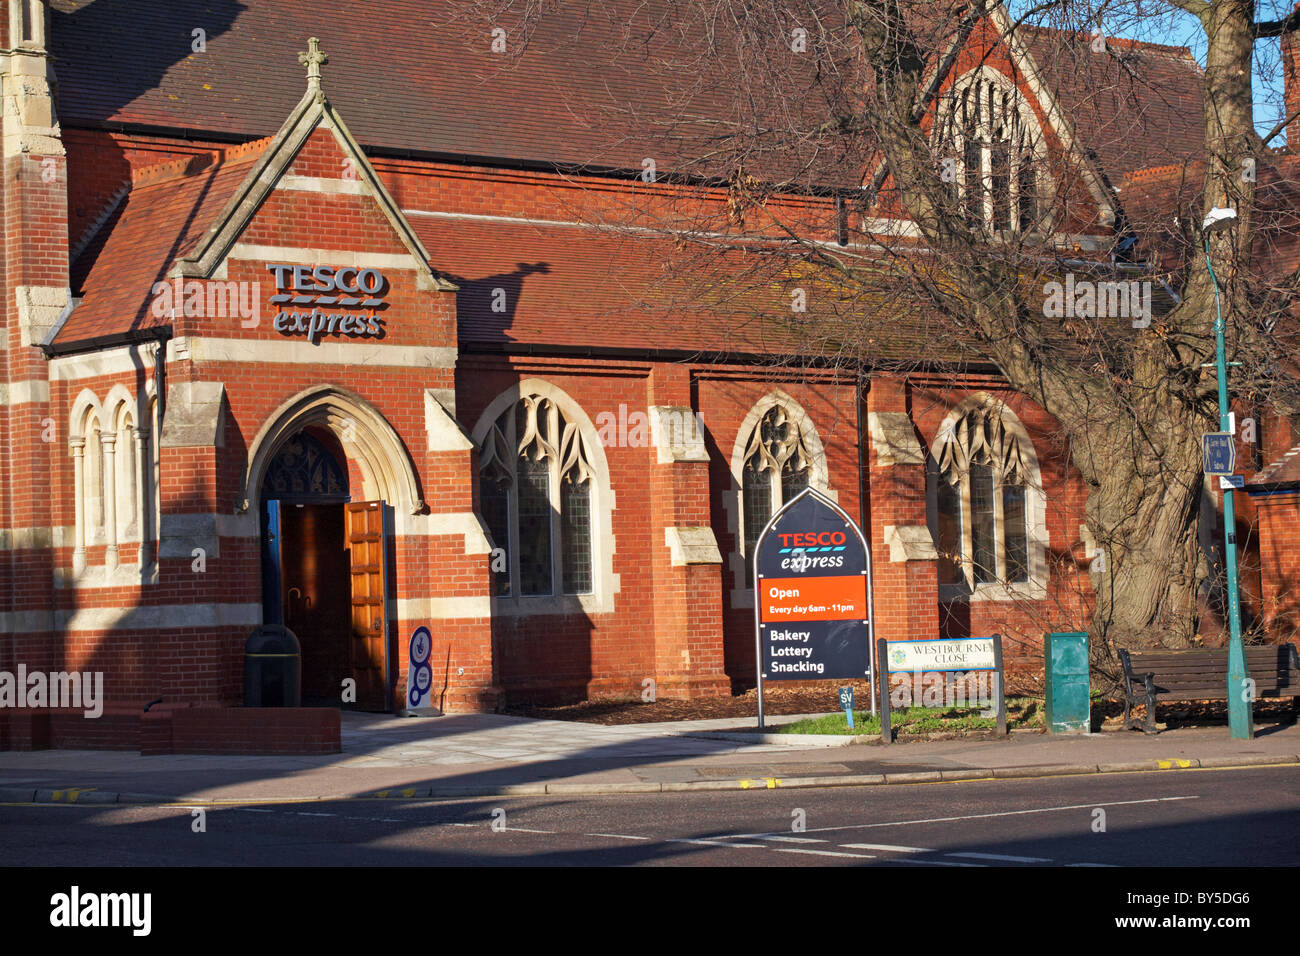 Tesco Express store shop - converted church in Westbourne, Bournemouth, Dorset UK in January Stock Photo